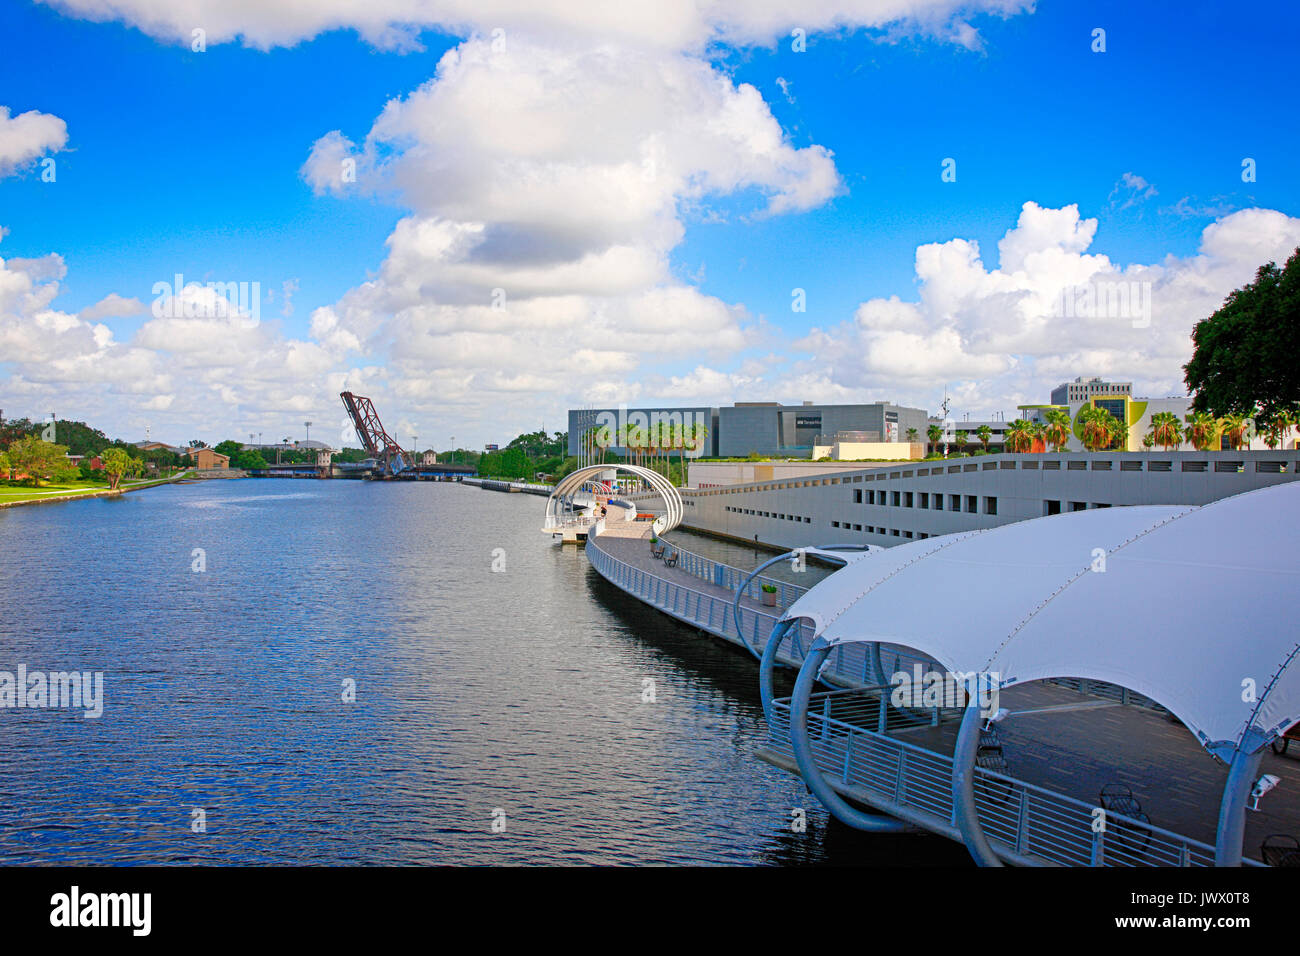 The Hillsborough River waterfront in downtown Tampa FL, USA Stock Photo